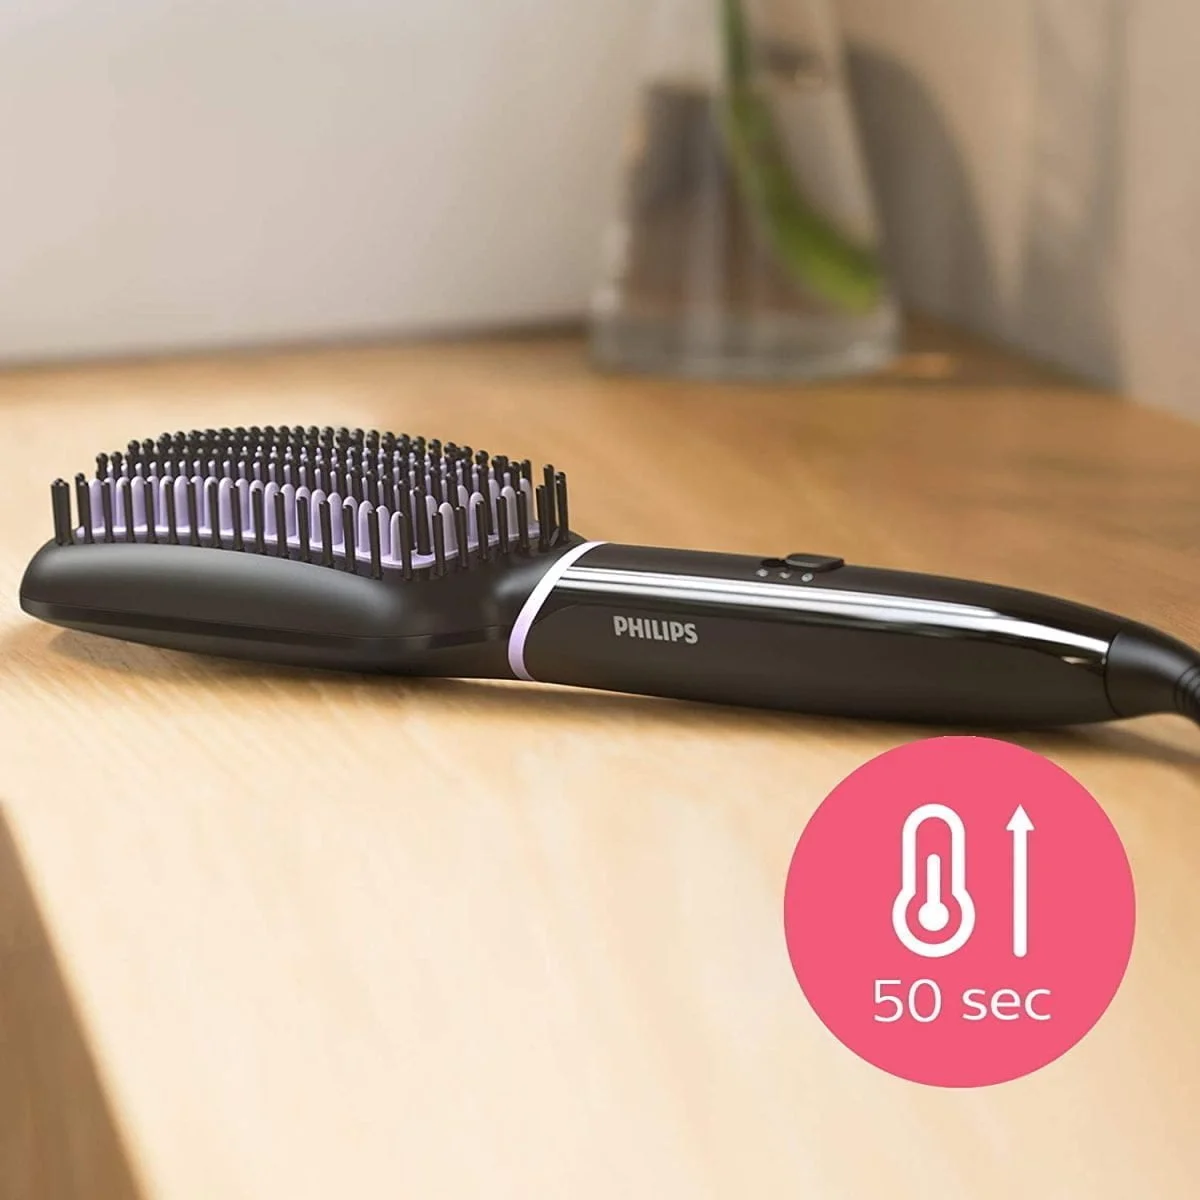 Philips &Lt;H1&Gt;Philips Stylecare Heated Brush Bh880/00 - Hair Styling Devices (Straightening Brush, 170 °C, 200 °C, Ptc, Black, Pink, Hanging Ring)&Lt;/H1&Gt; Https://Www.youtube.com/Watch?V=P0Mcntxr9I4 &Lt;Ul Class=&Quot;A-Unordered-List A-Vertical A-Spacing-Mini&Quot;&Gt; &Lt;Li&Gt;&Lt;Span Class=&Quot;A-List-Item&Quot;&Gt; Natural Straight Hair In 5 Minutes On Semi-Wet Or Dry Hair And Medium Or Long Length &Lt;/Span&Gt;&Lt;/Li&Gt; &Lt;Li&Gt;&Lt;Span Class=&Quot;A-List-Item&Quot;&Gt; Ceramic Coating With Tourmaline &Lt;/Span&Gt;&Lt;/Li&Gt; &Lt;Li&Gt;&Lt;Span Class=&Quot;A-List-Item&Quot;&Gt; 2 Temperature Settings For All Hair Types &Lt;/Span&Gt;&Lt;/Li&Gt; &Lt;Li&Gt;&Lt;Span Class=&Quot;A-List-Item&Quot;&Gt; Thermoprotect Technology - Maintains A Constant Temperature Throughout The Brush To Prevent Overheating &Lt;/Span&Gt;&Lt;/Li&Gt; &Lt;Li&Gt;&Lt;Span Class=&Quot;A-List-Item&Quot;&Gt; Quick Heat Up In 50 Seconds With Ready-To-Use Indicator &Lt;/Span&Gt;&Lt;/Li&Gt; &Lt;/Ul&Gt; Philips Philips Stylecare Heated Brush Bh880/00 - Hair Styling Devices